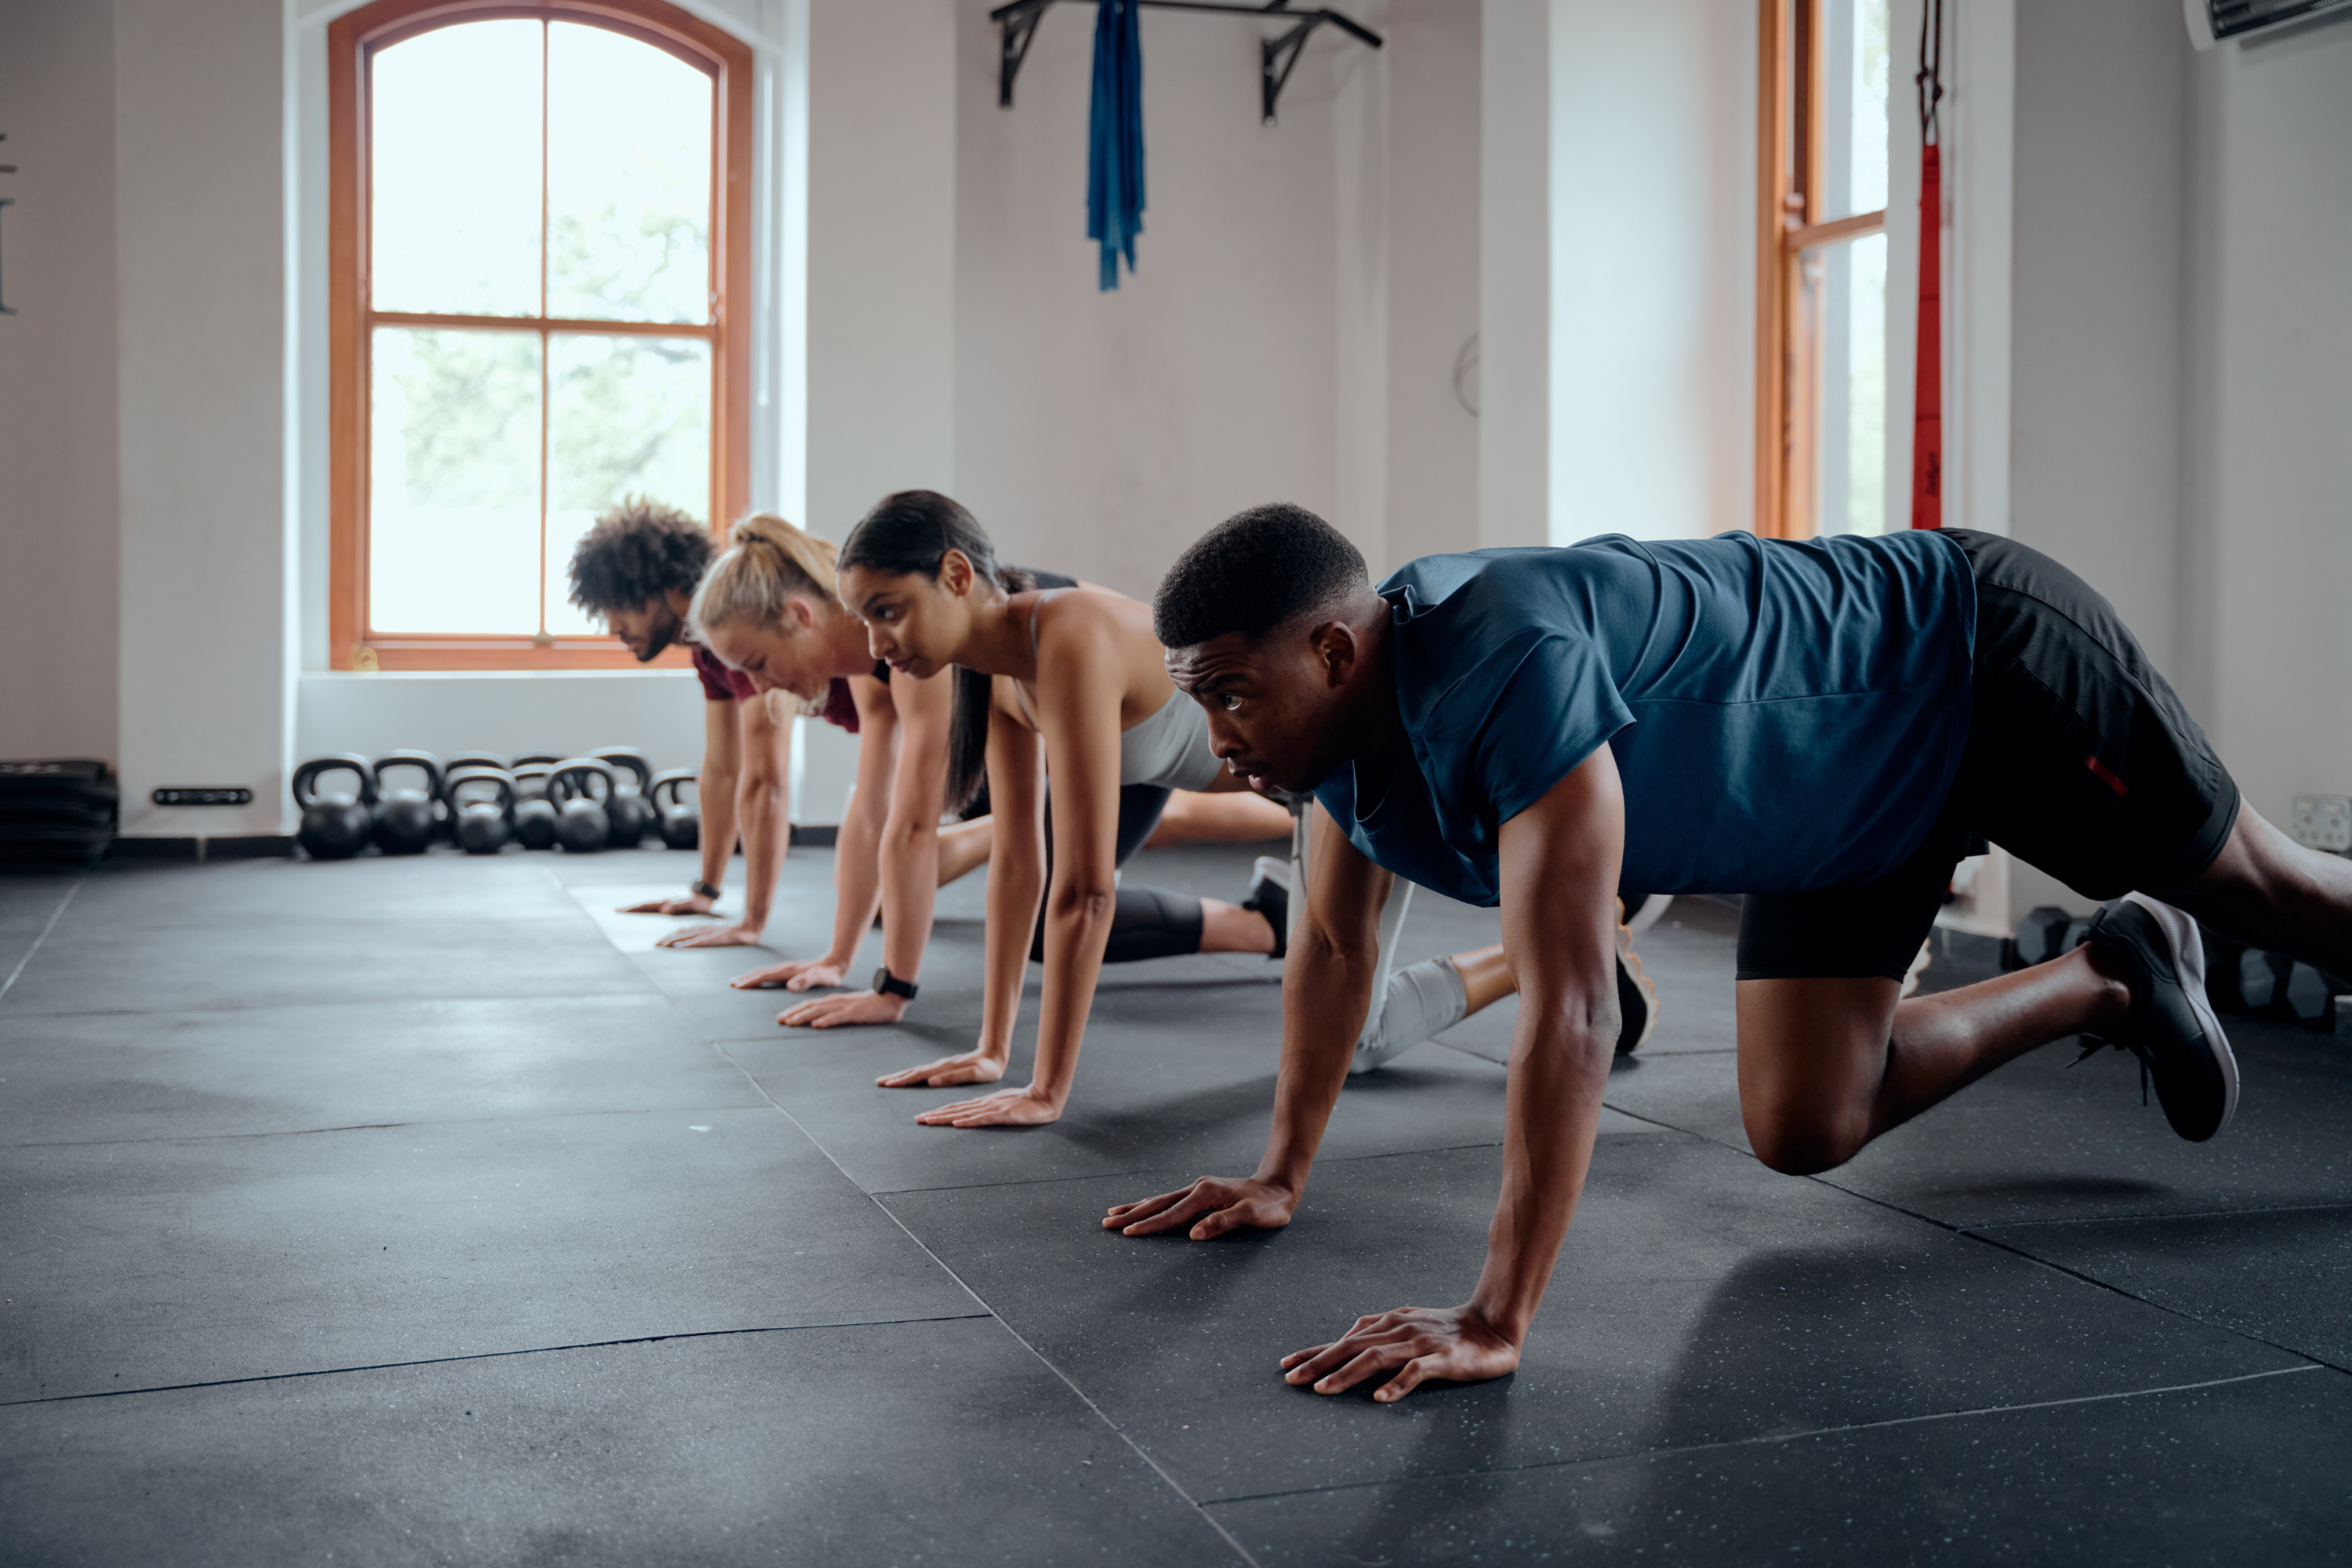 Group of people doing push-ups in the gym.